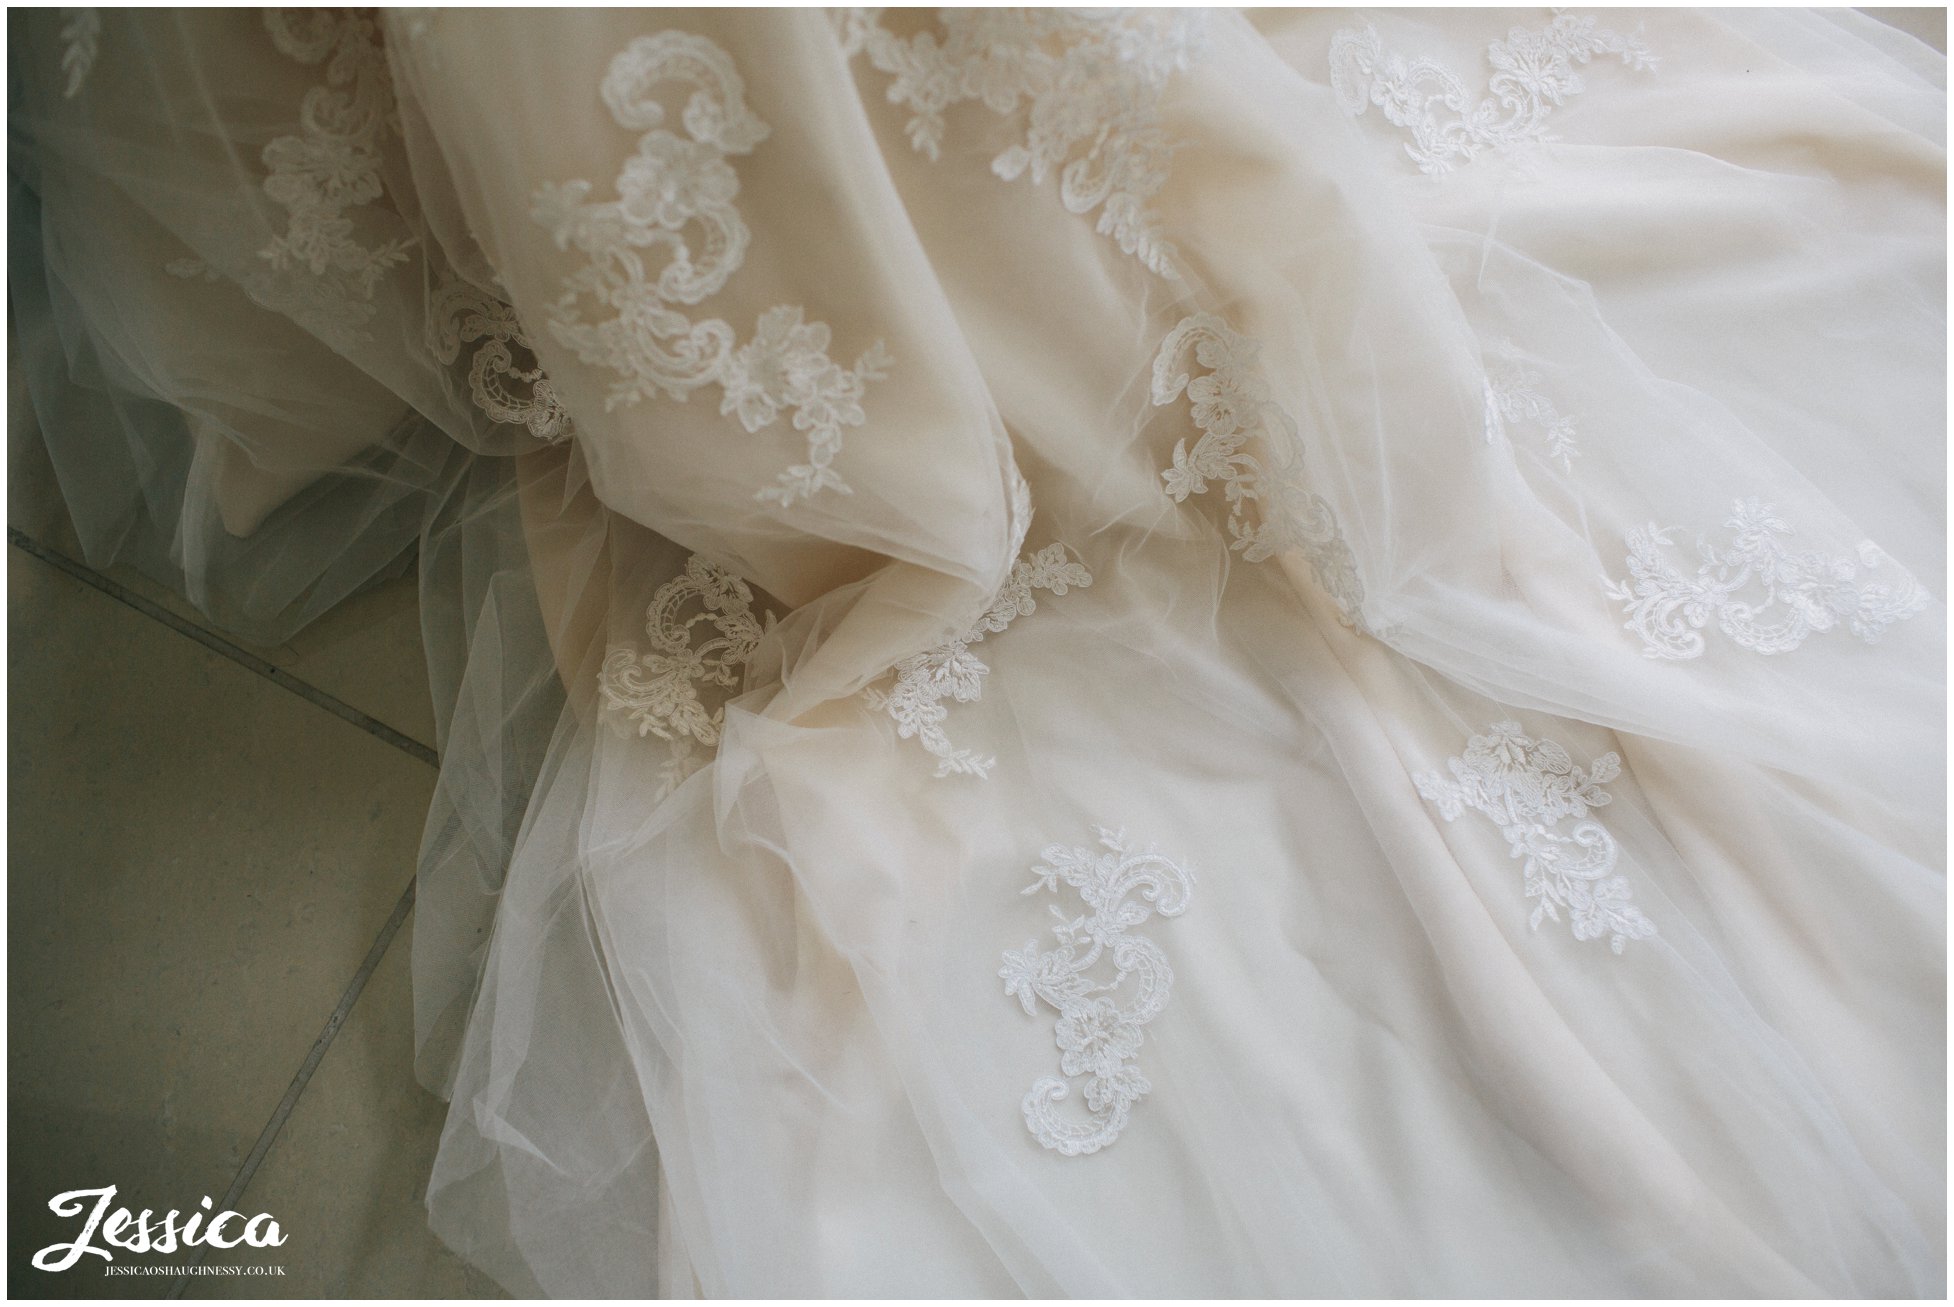 close up of lace detail on the train of the wedding dress